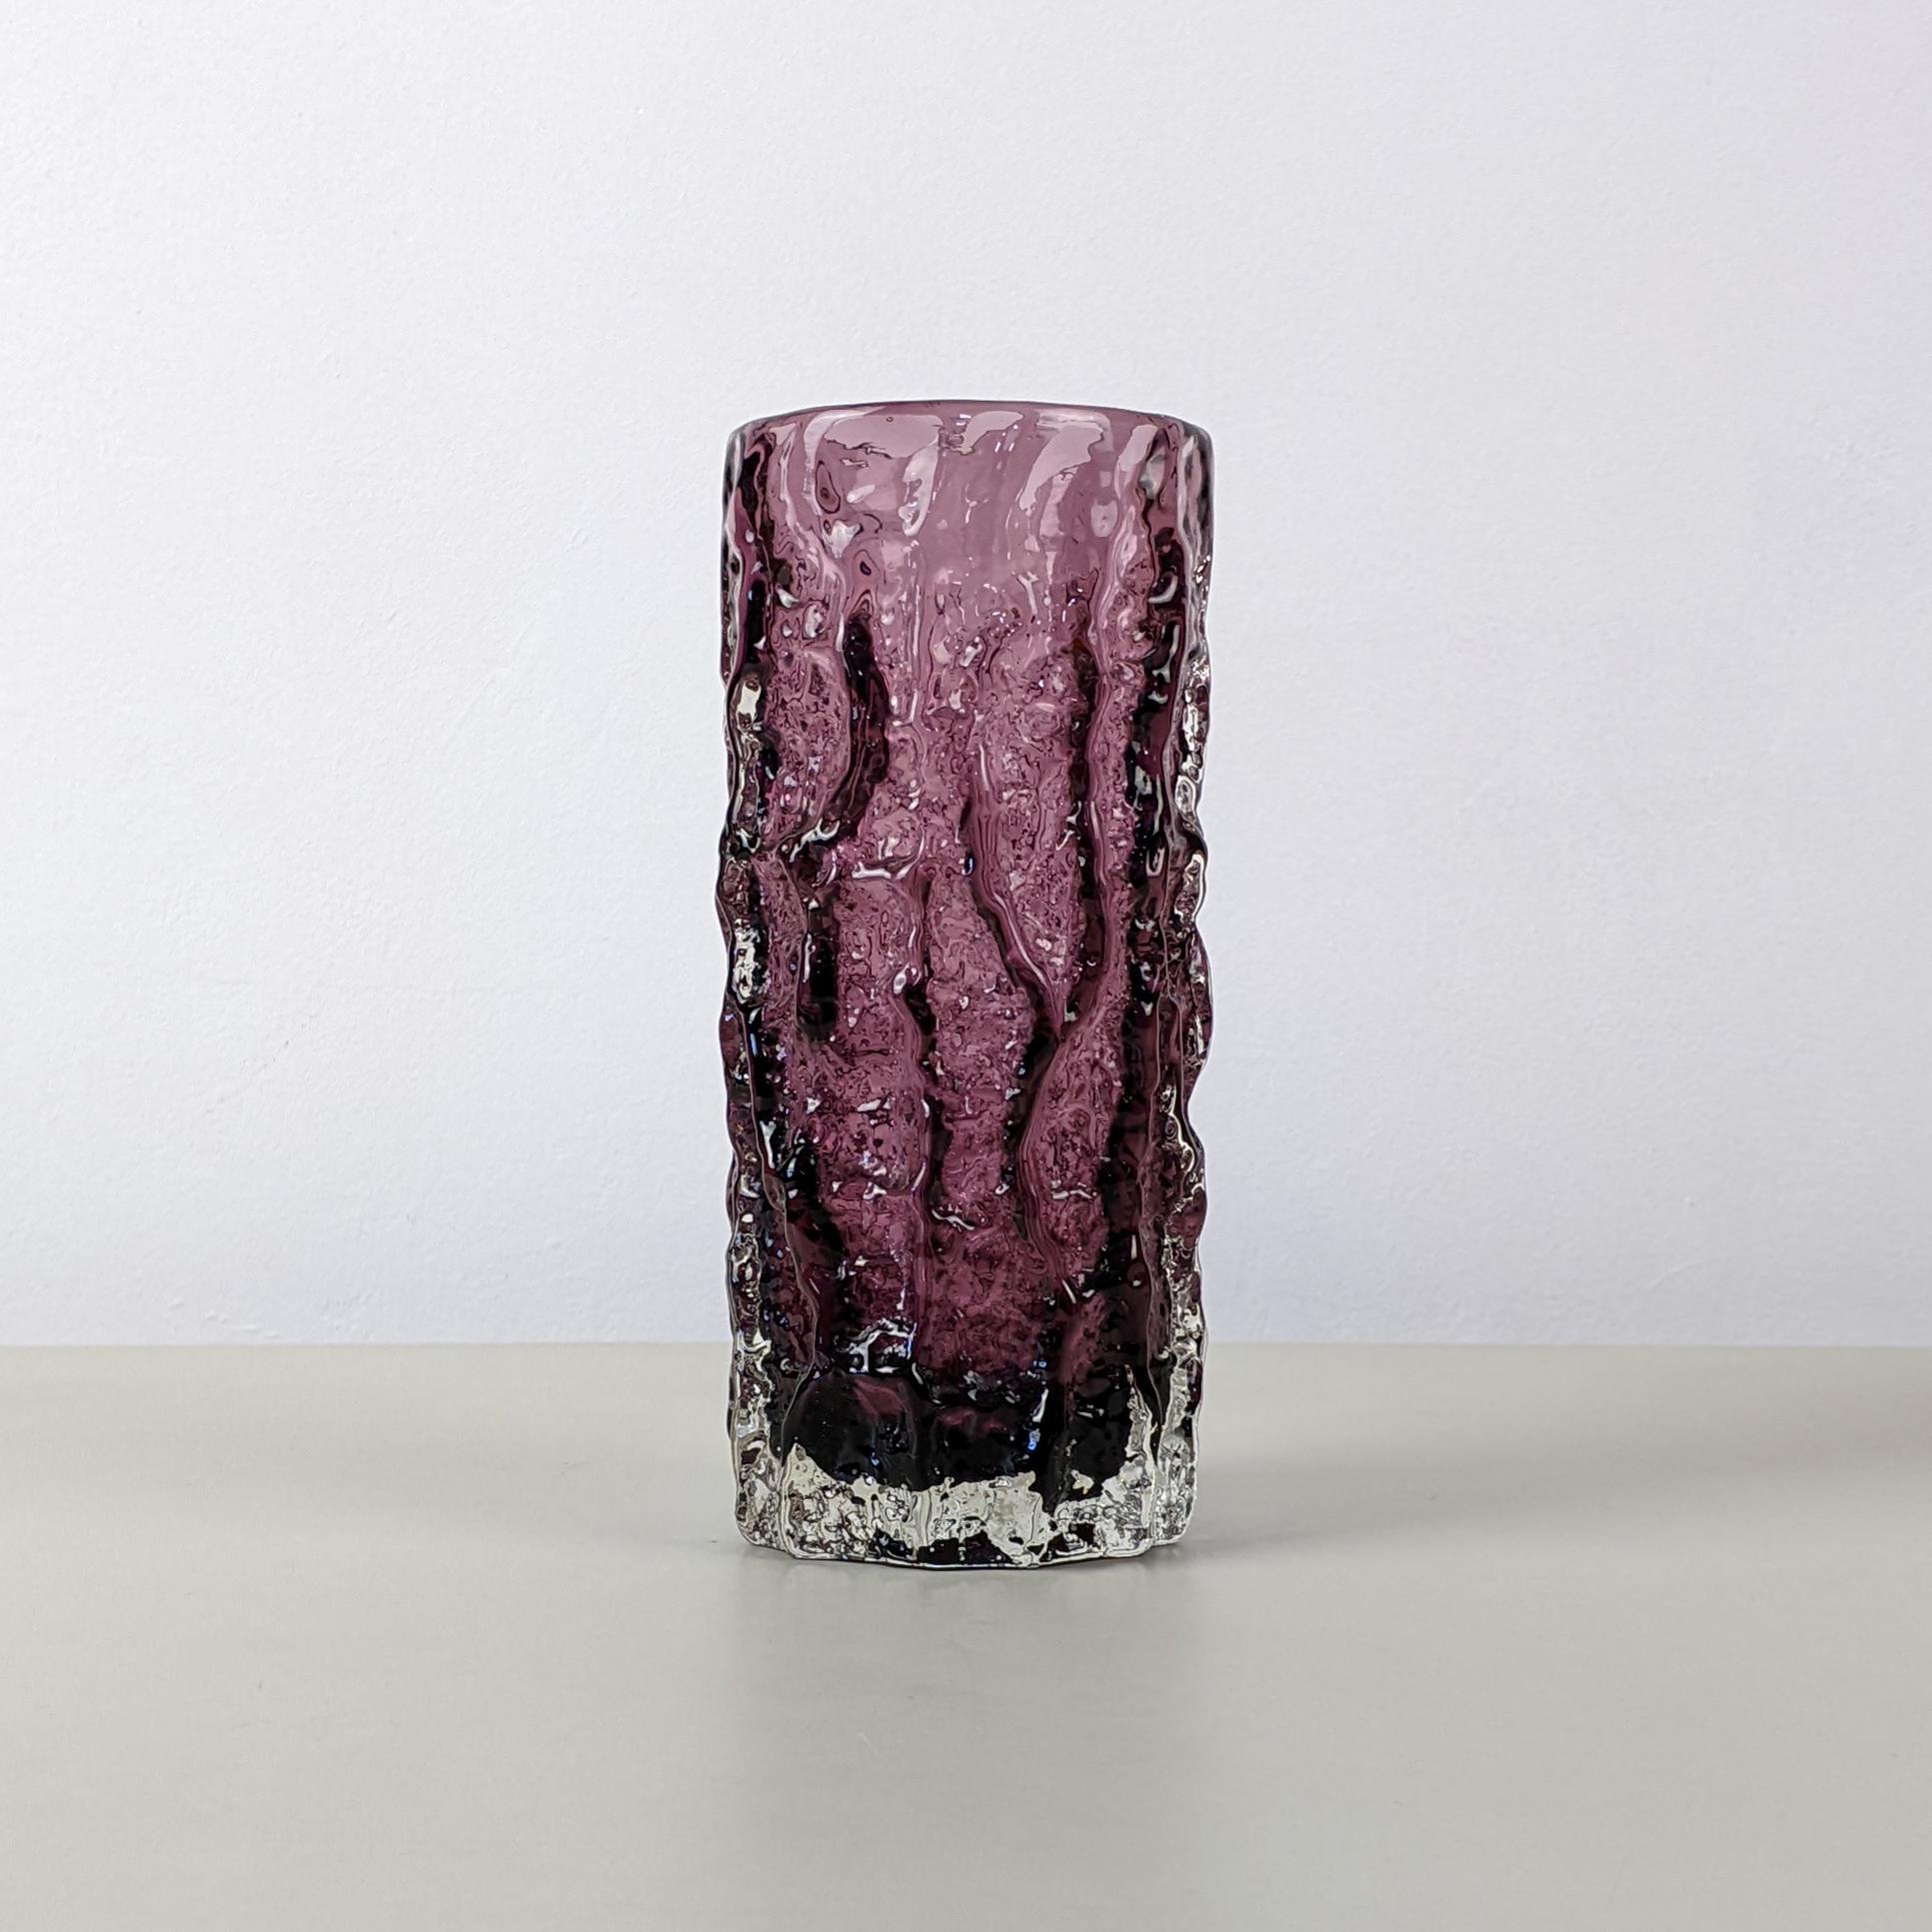 Geoffrey Baxter for Whitefriars, c. 1960s
Medium ‘Bark’ vase, from the “Textured’ range, model number 9690
Purple tinted glass
Excellent condition without damage

(We have various Bark vases available. This one is pictured alongside two orange